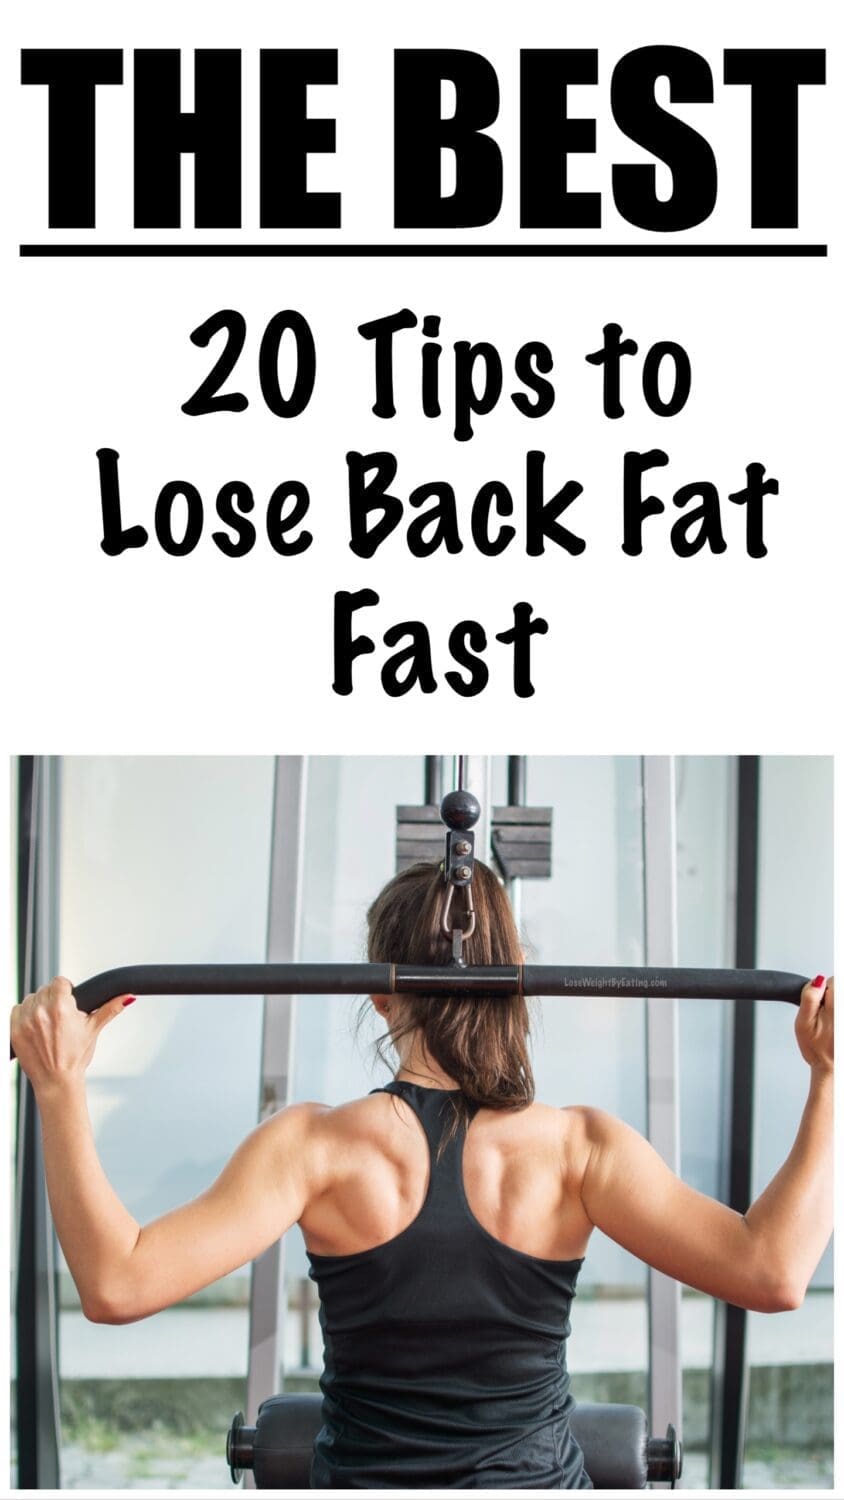 20 Tips to Lose Back Fat Fast